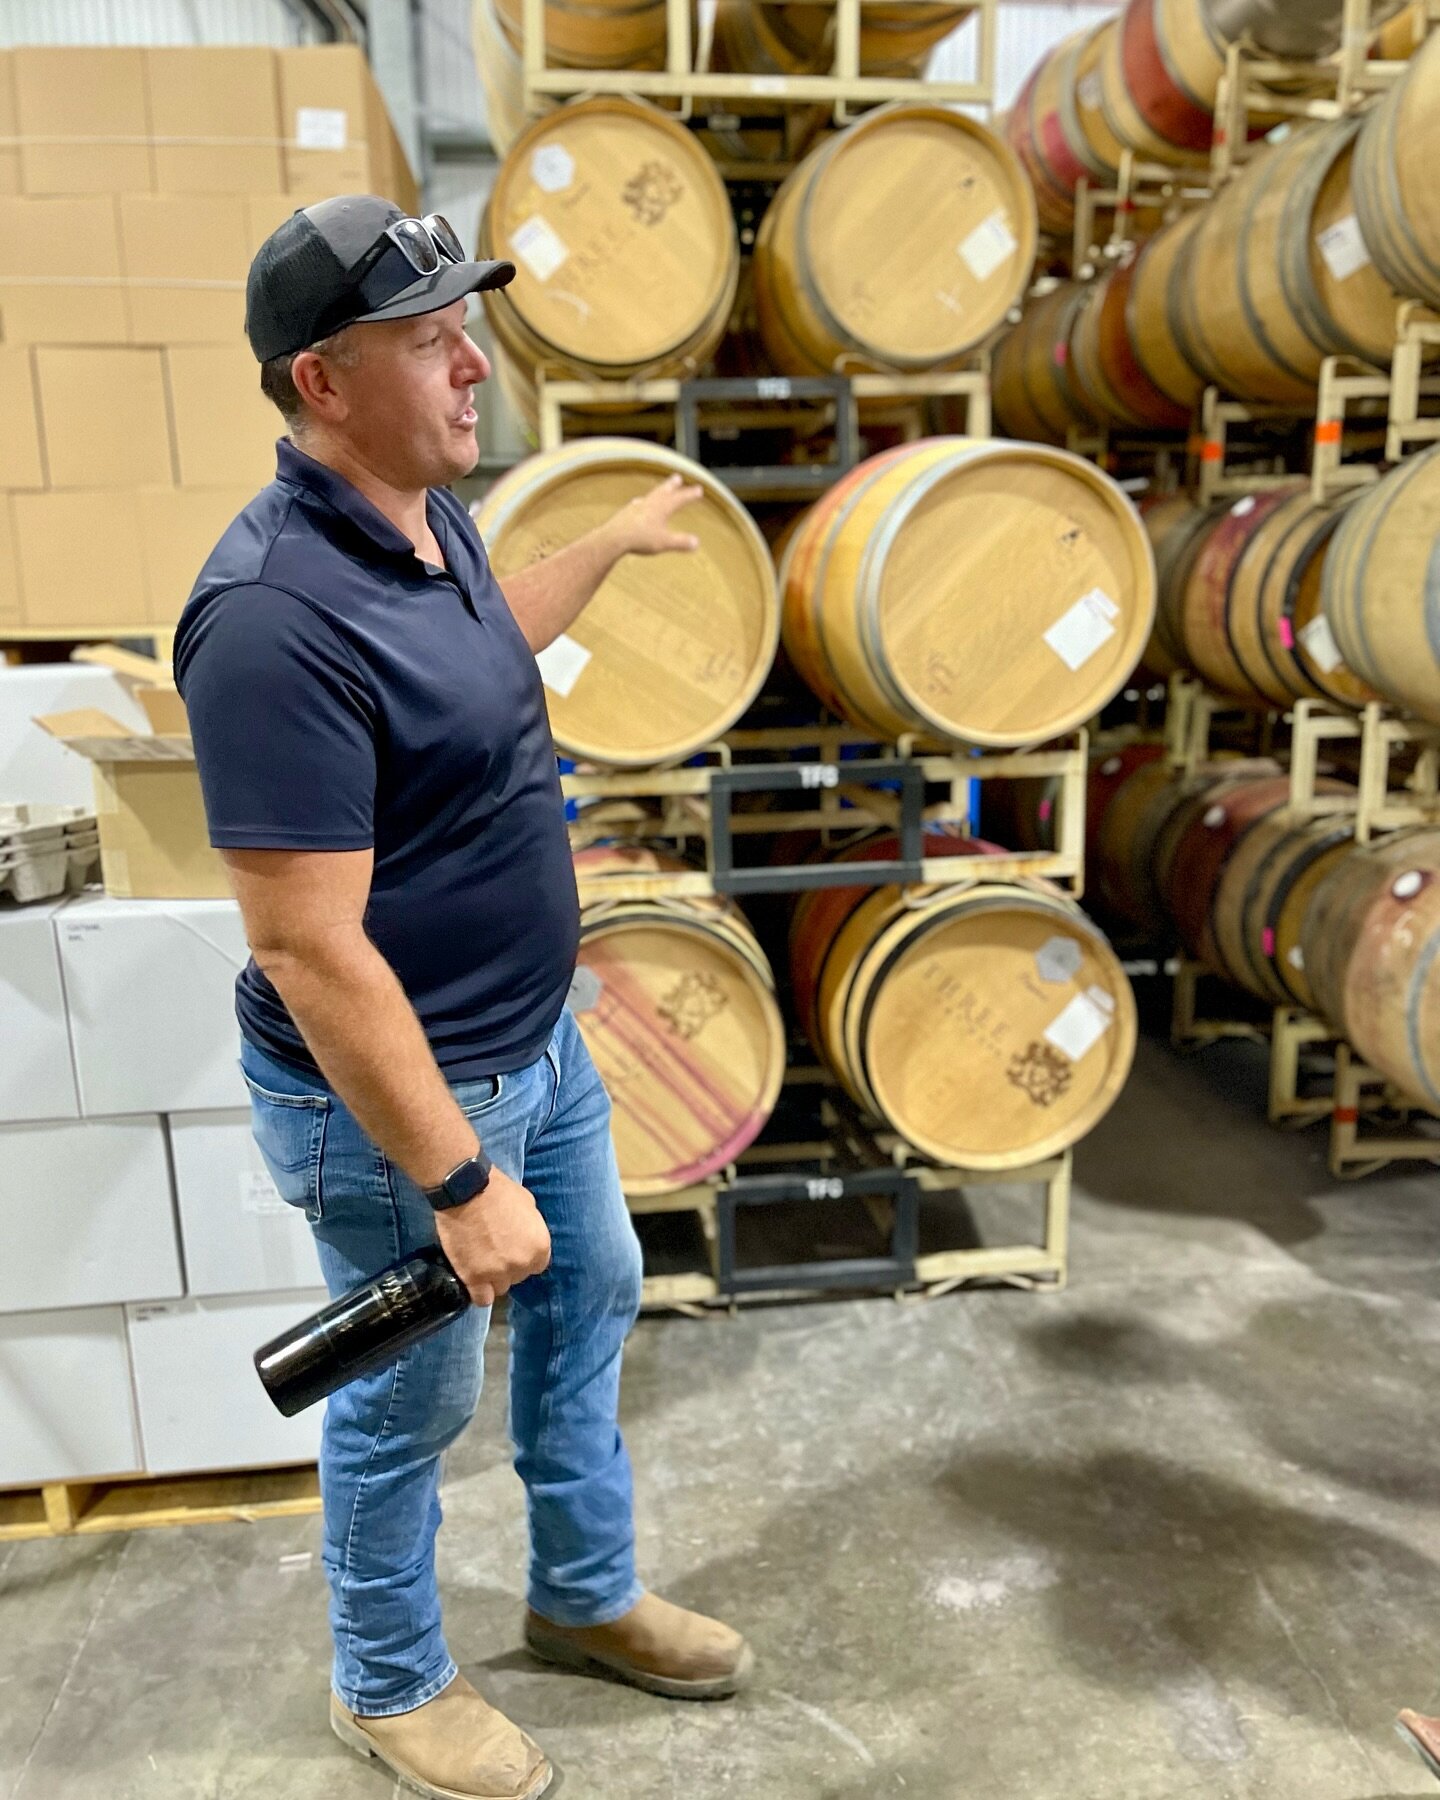 CAPTION CONTEST!!! Our guess is &ldquo;Back in my day, I could drink one of these barrels in a single sitting.&rdquo; 🤨🤣
.
On your mark, get set&hellip; CAPTION AWAY!
.
#threefatguyswines #sonoma #captioncontest #caption #winery #winemaker #winenot